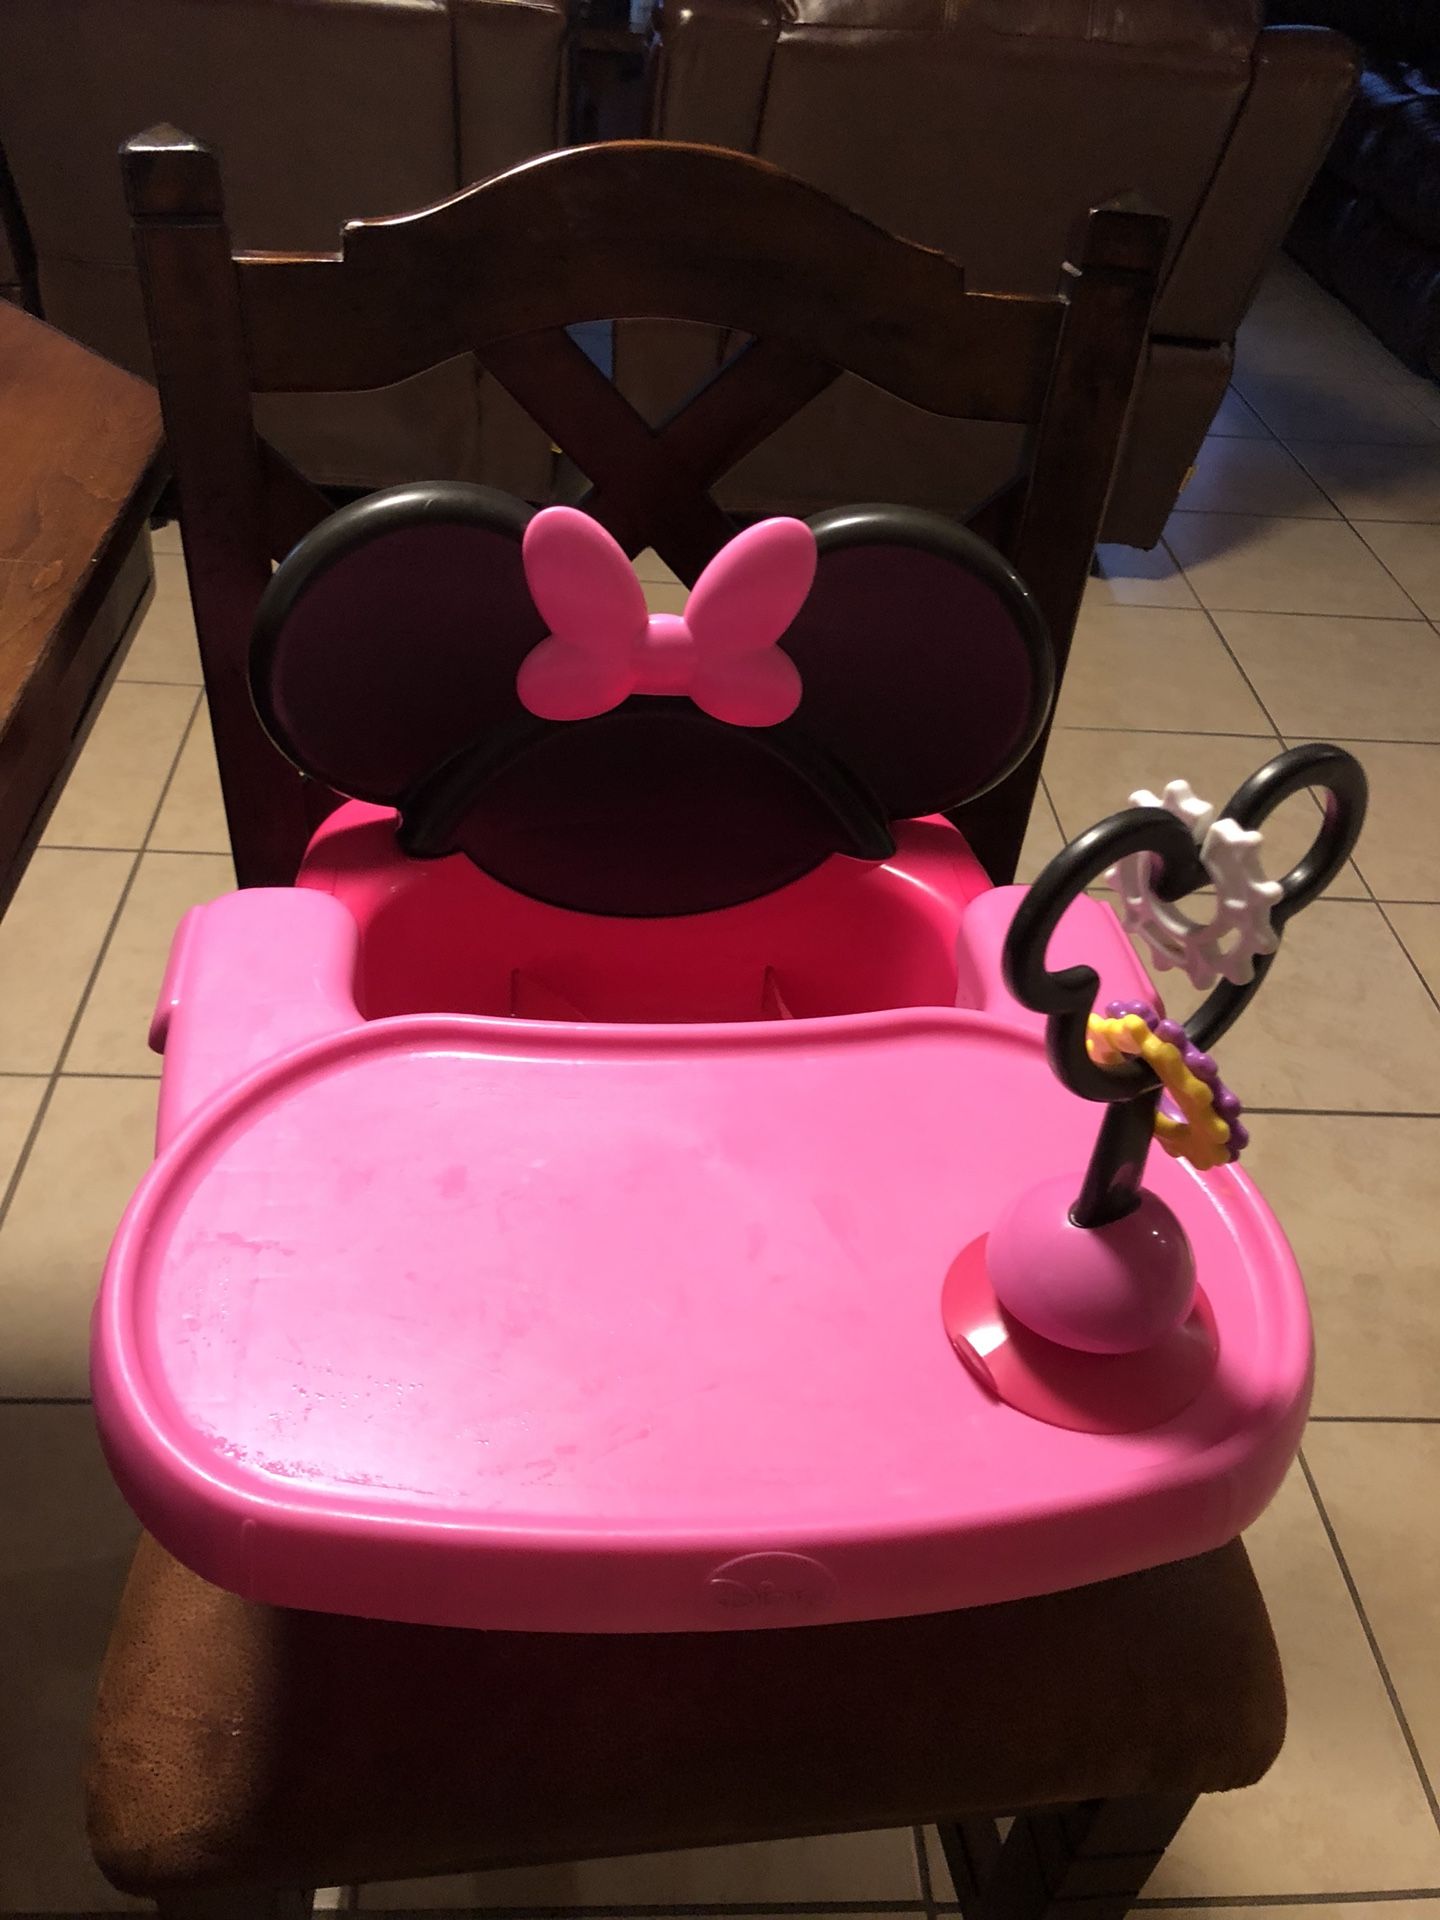 Minnie Mouse booster seat